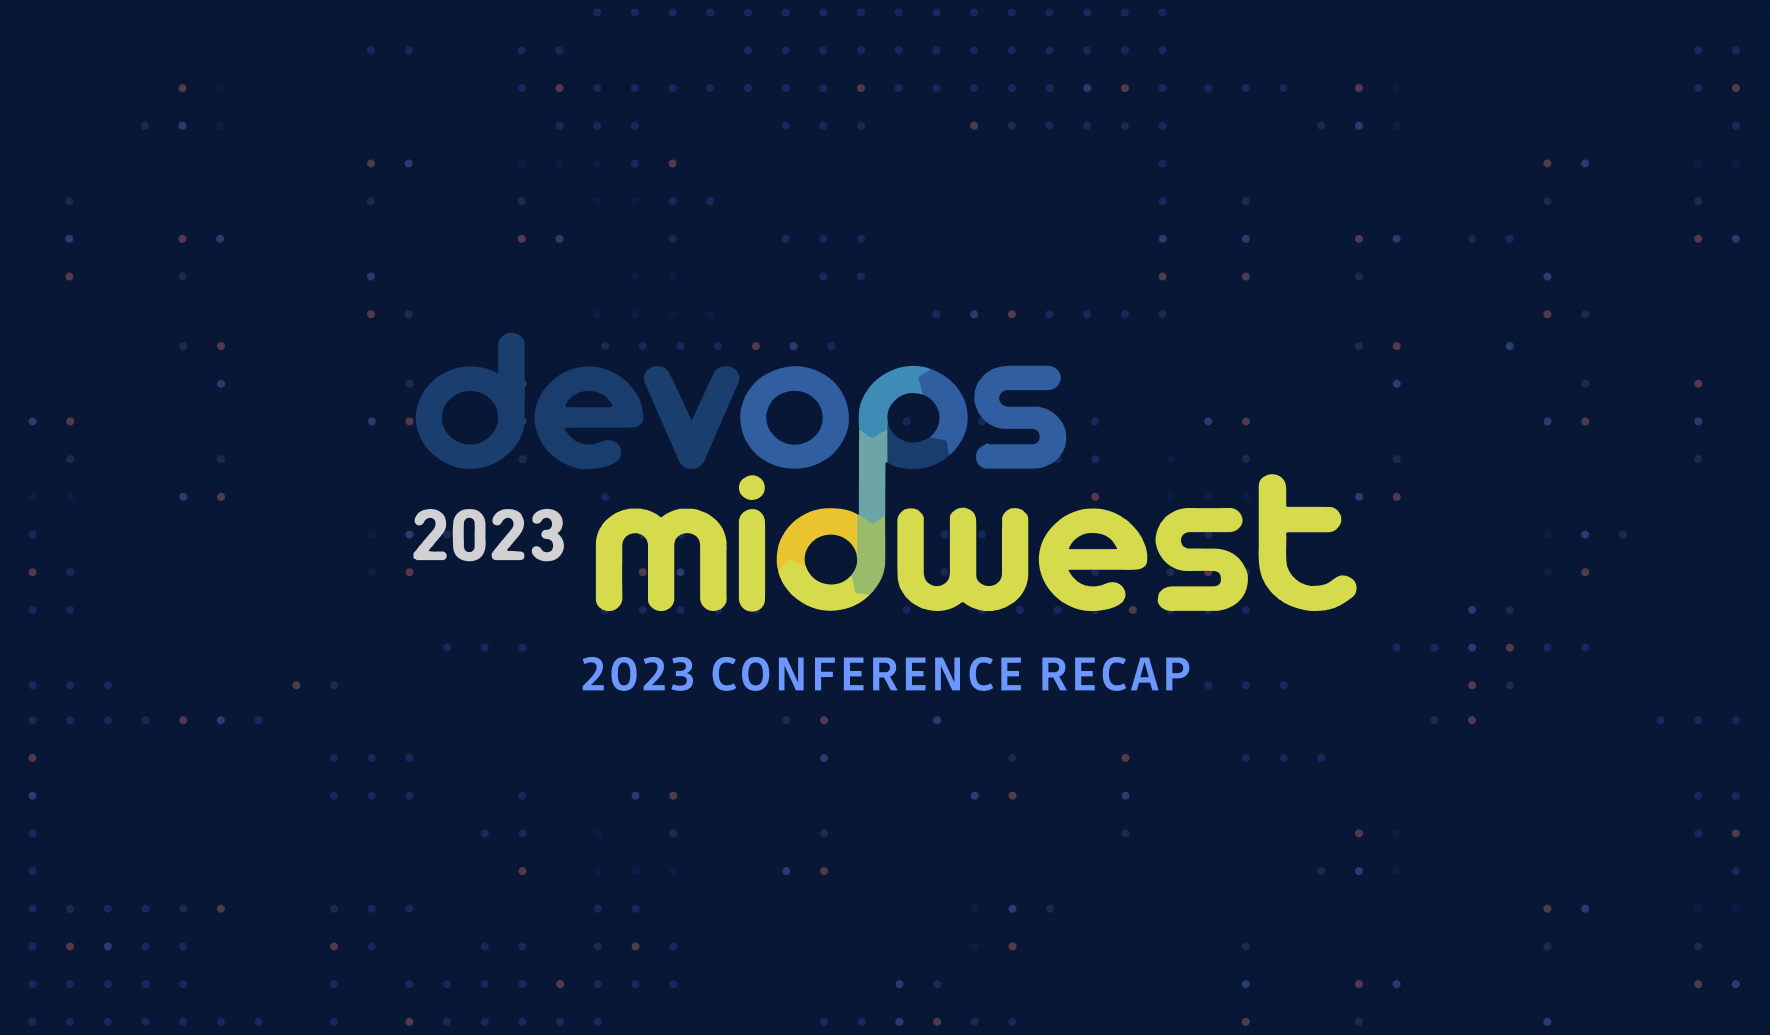 DevOps Midwest - A community event full of DevSecOps best practices.